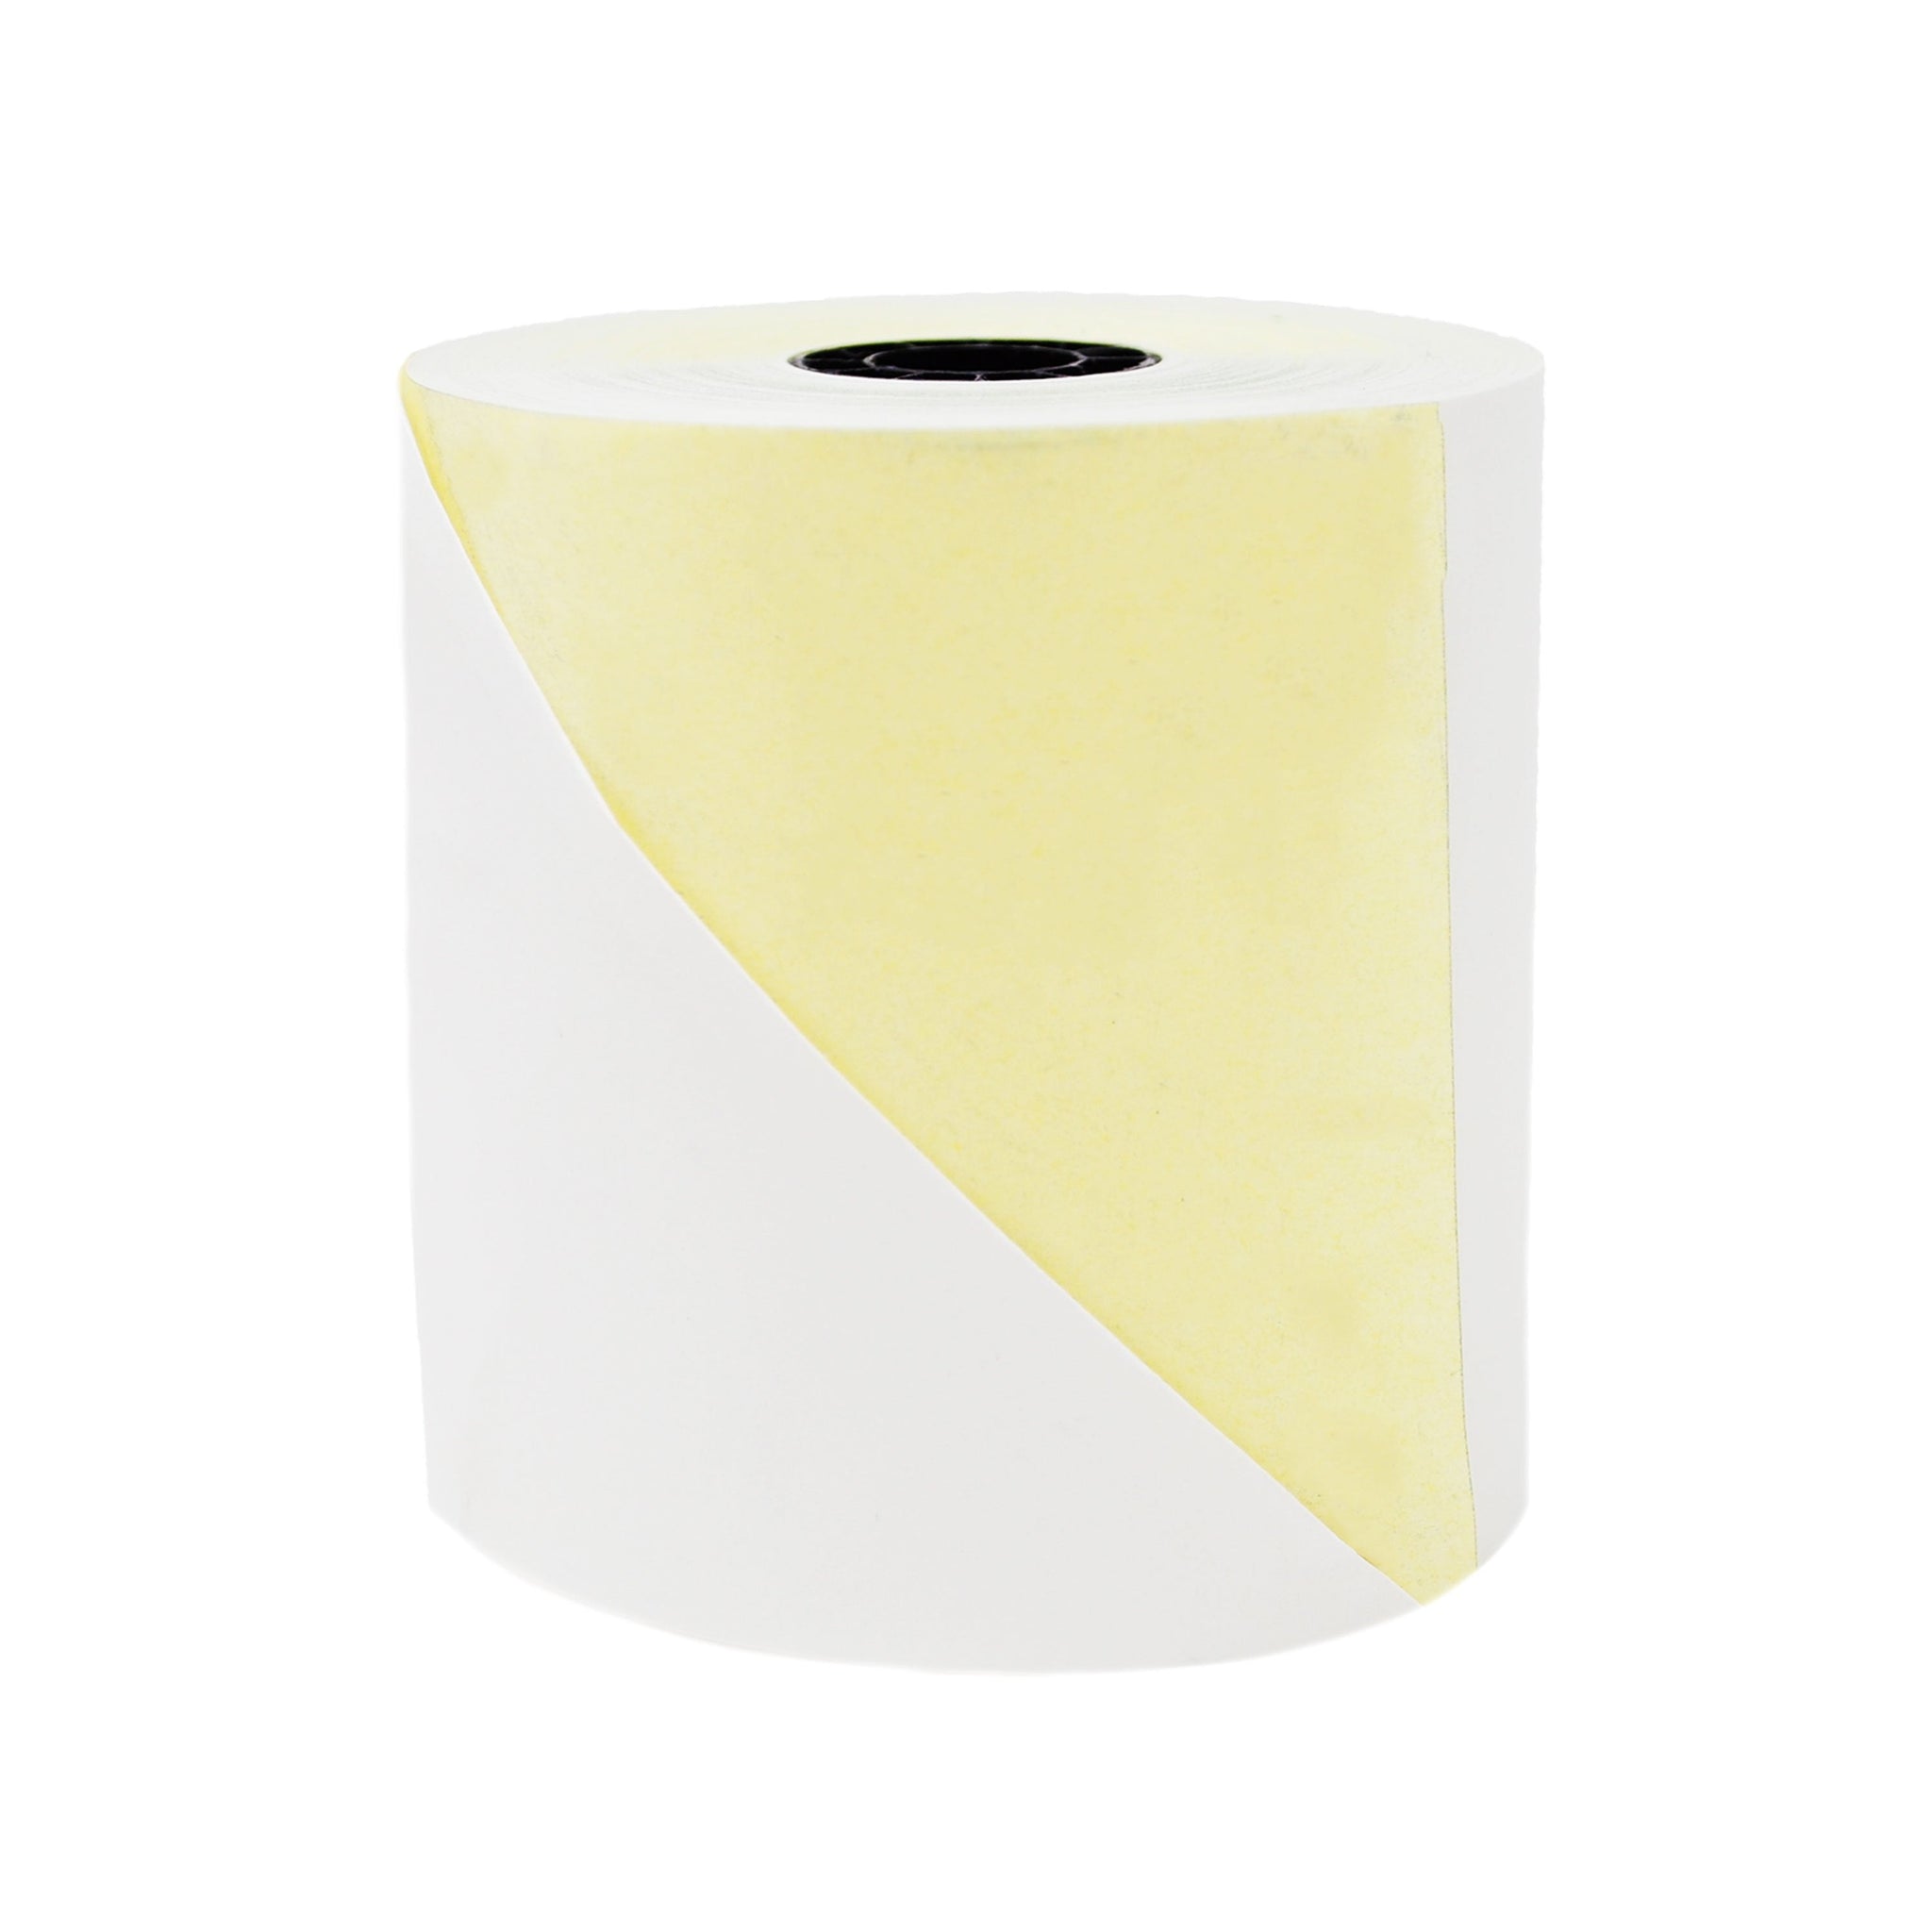 NoteBuddy™ Paper Rolls - 3 Pack – Doodle Dash